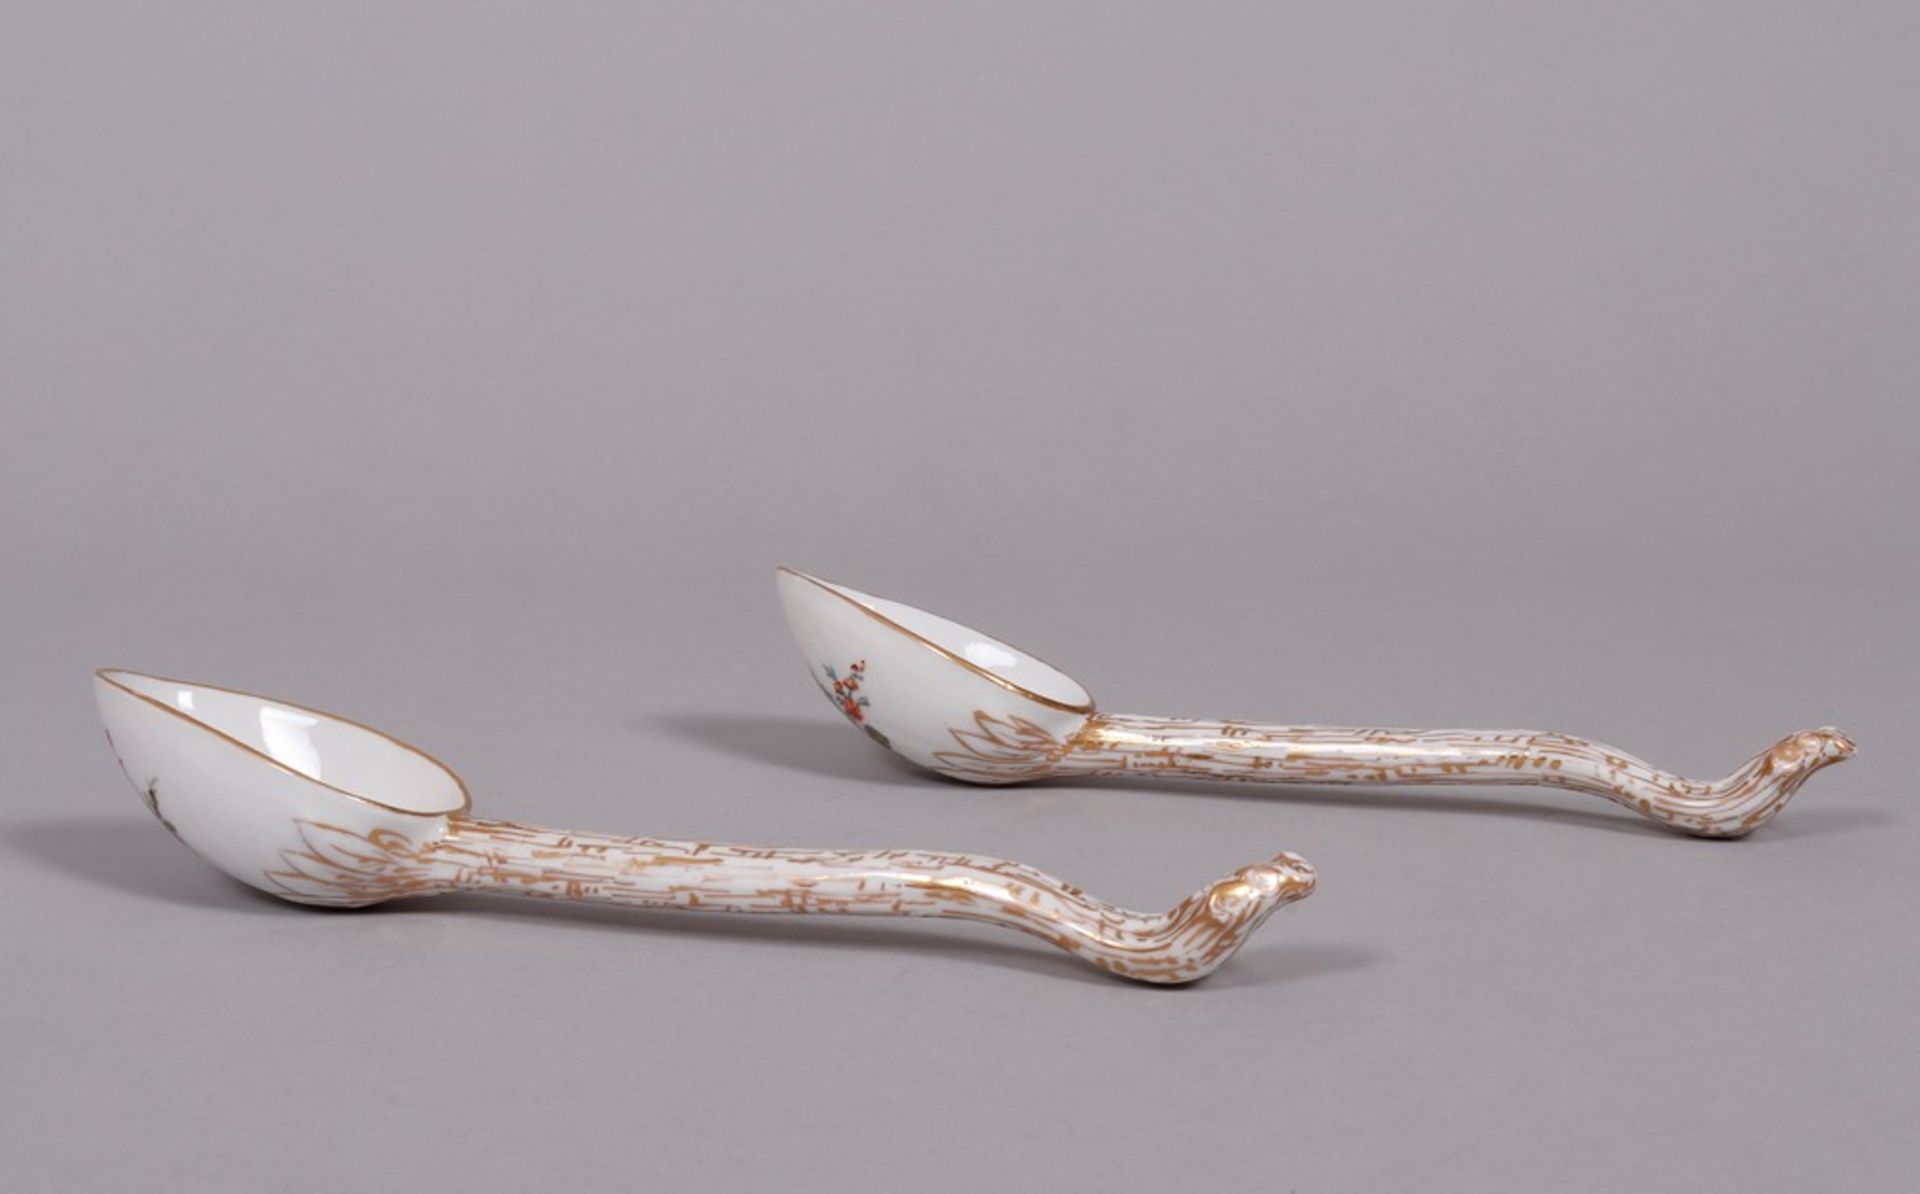 2 spoons, floral decoration, probably Meissen, 19th C. - Image 4 of 4